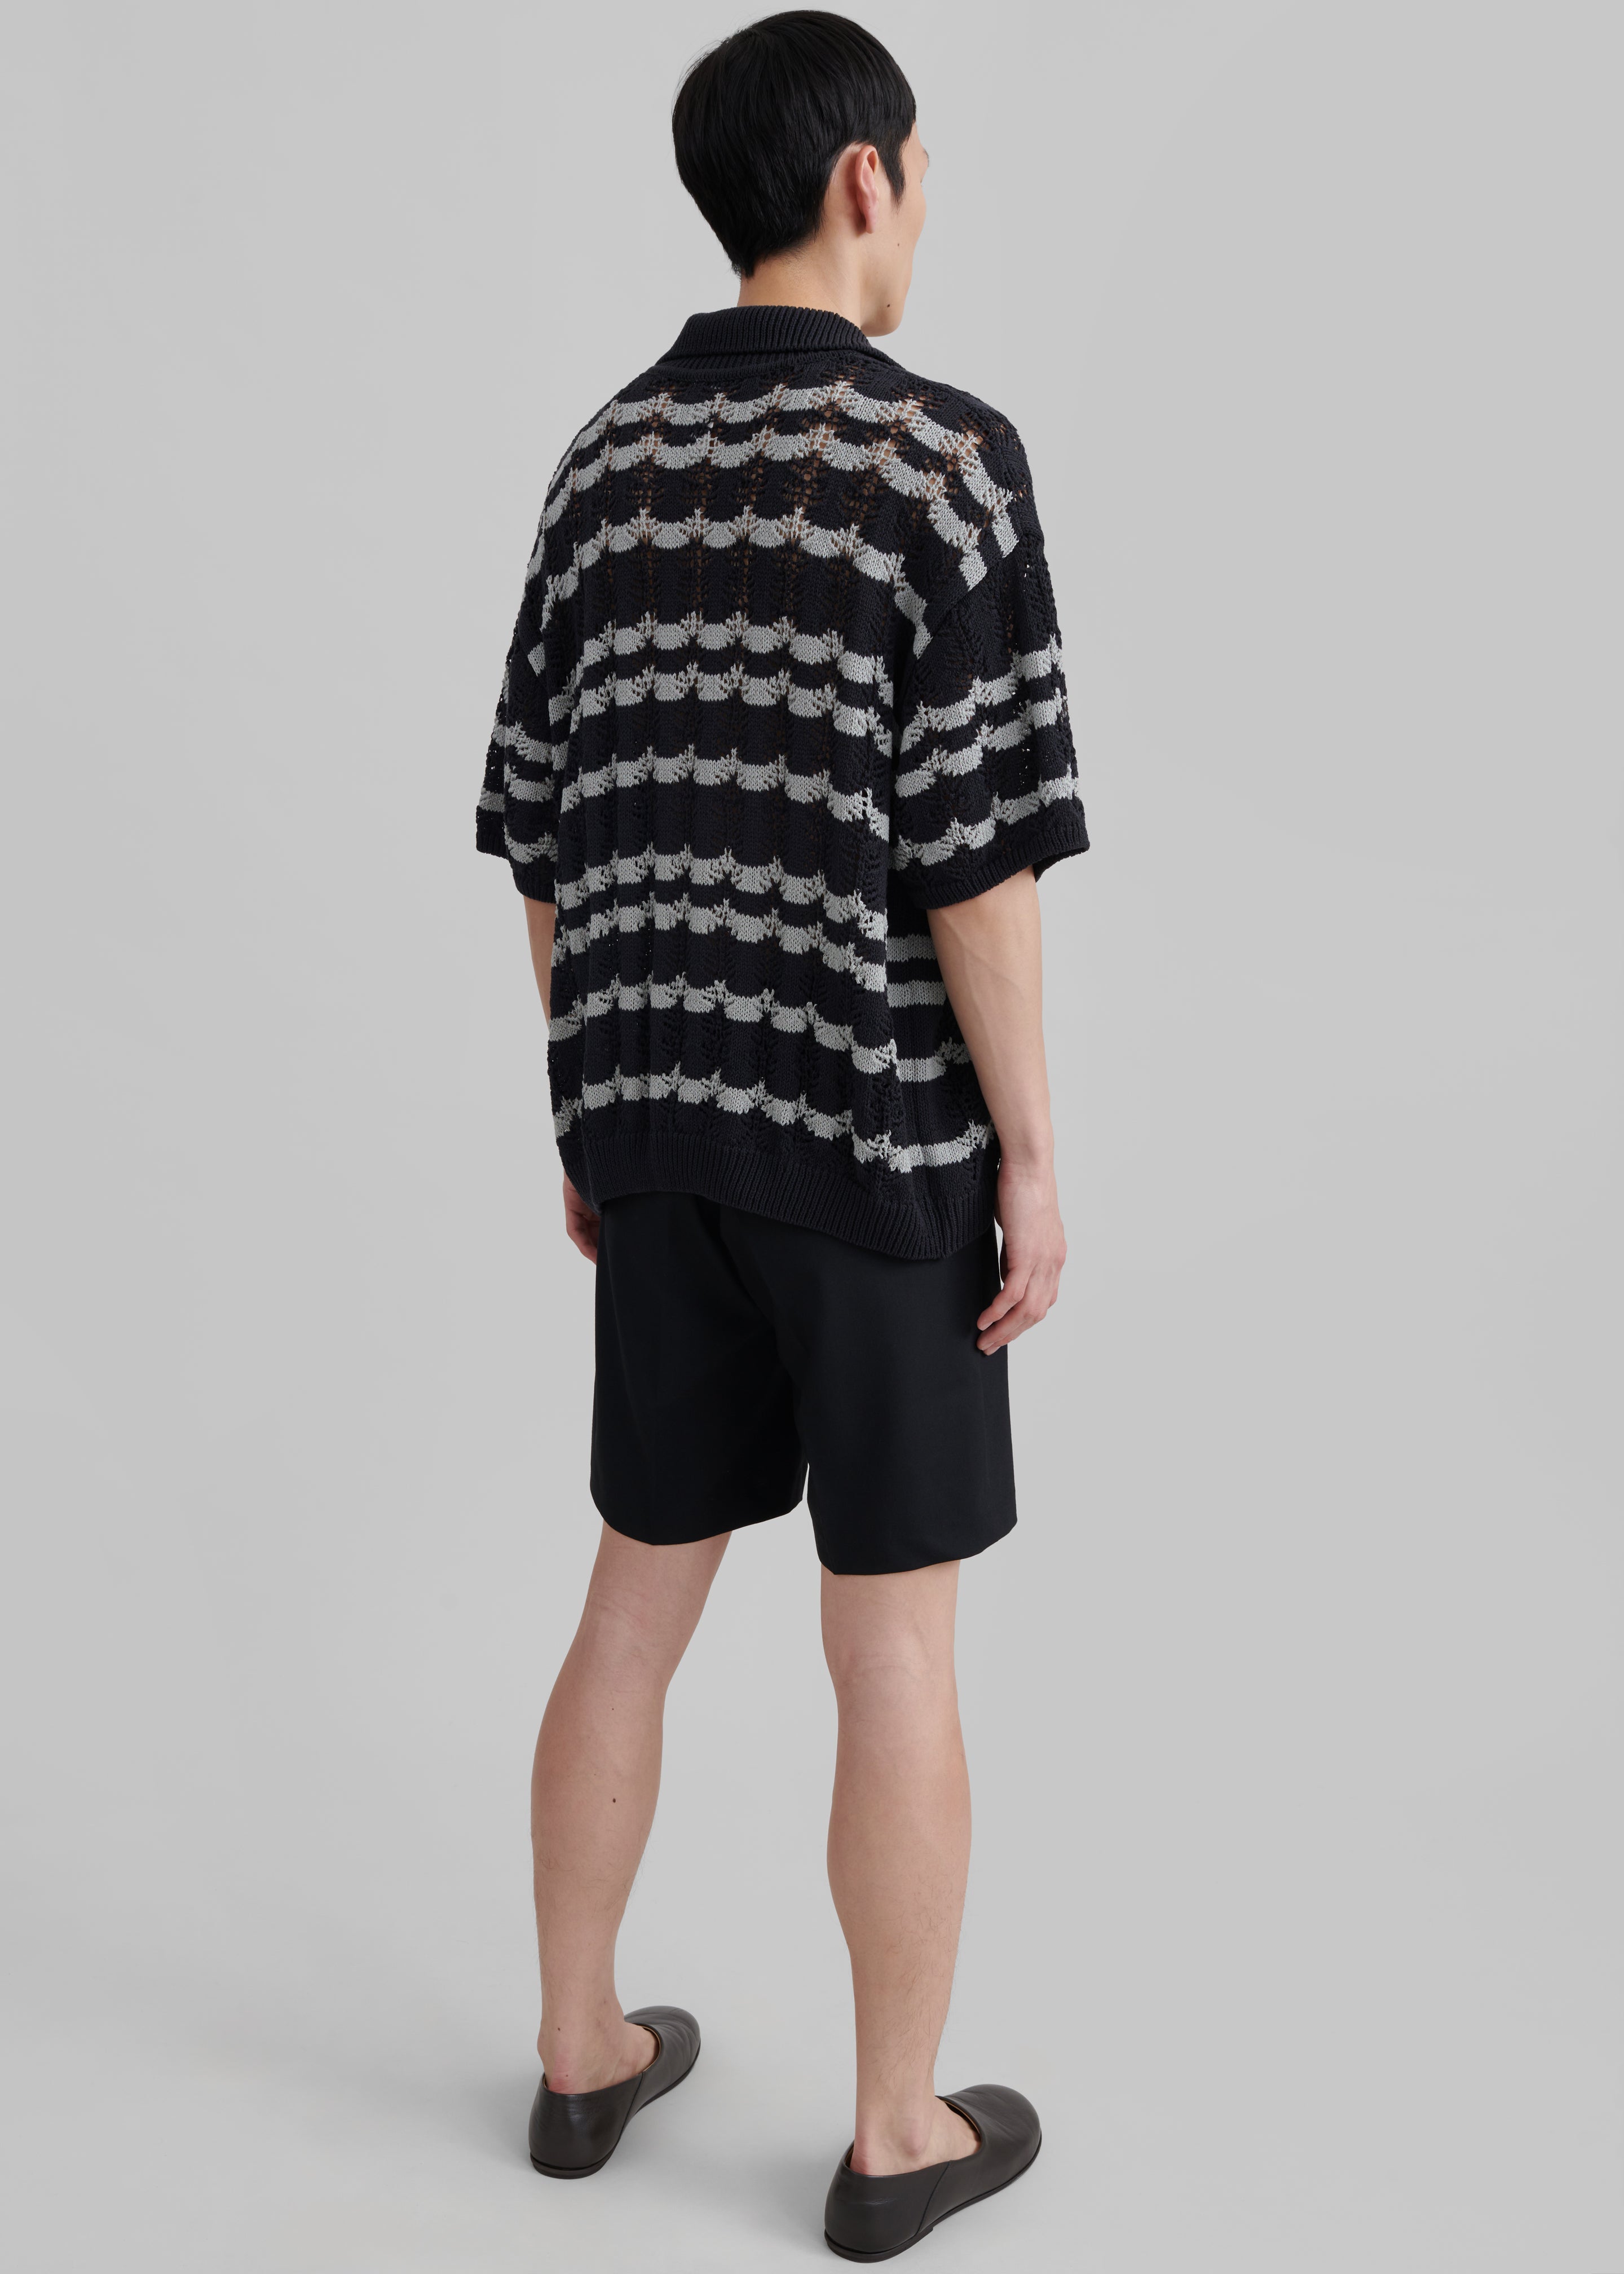 Lucca Knitted Top - Black - 7